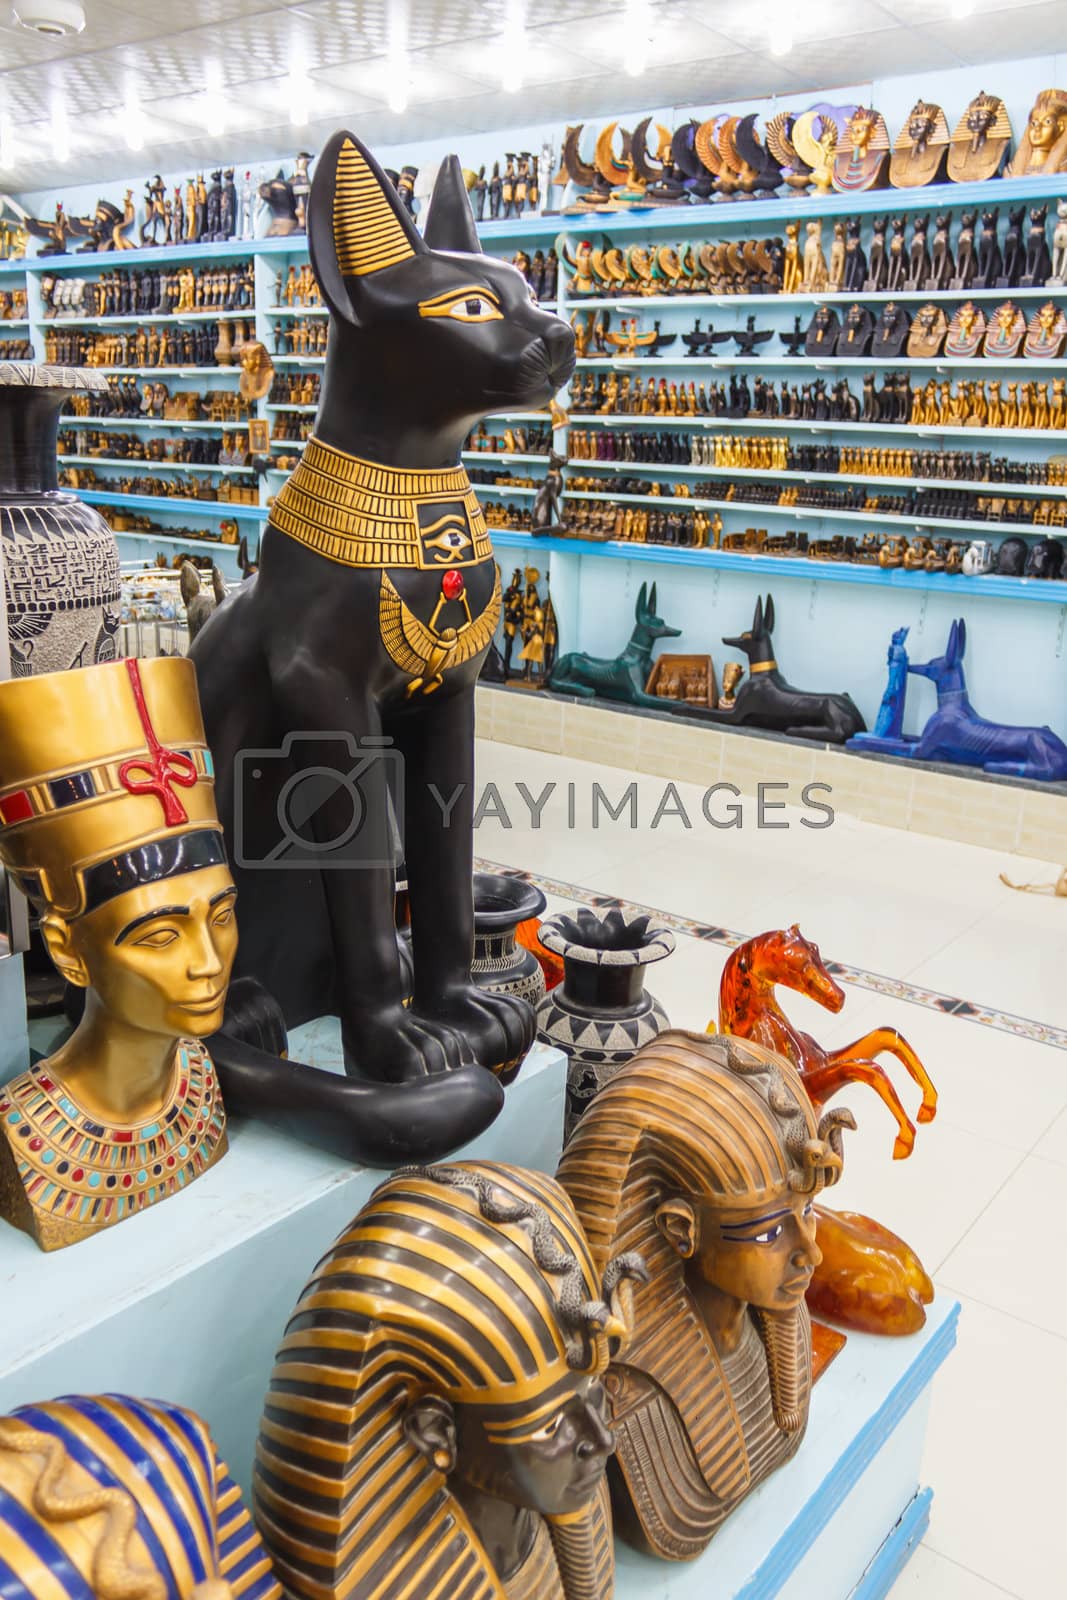 Royalty free image of Showcase in the shop with Egyptian souvenirs by oleg_zhukov